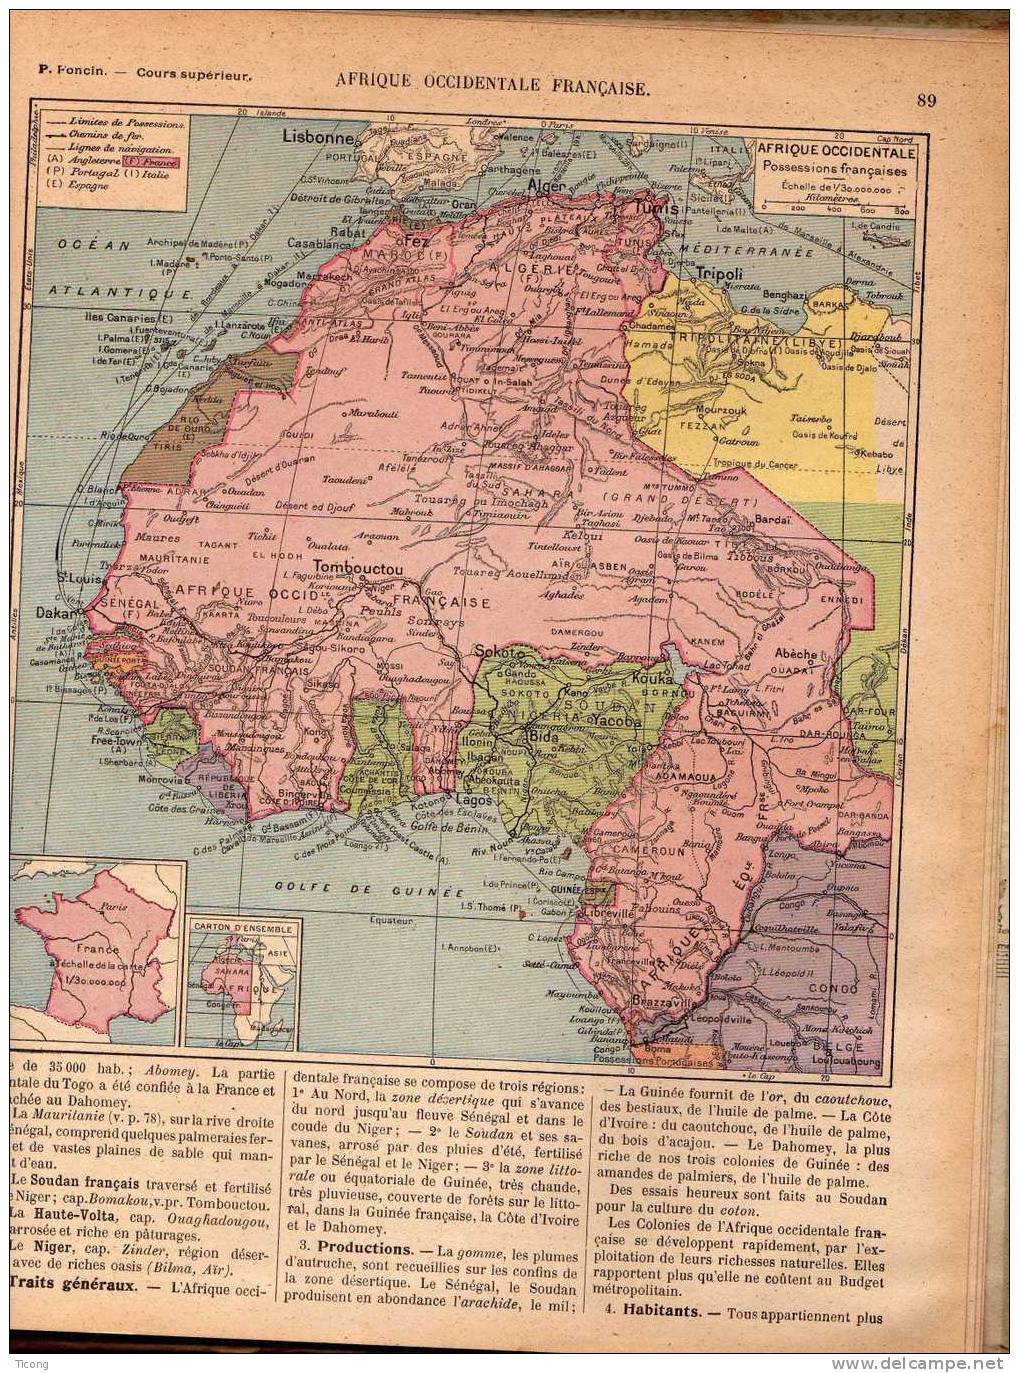 GEOGRAPHIE FONCIN 1926 - FRANCE MONDE COLONIES FRANCAISES - LIBRAIRIE ARMAND COLIN - 6-12 Years Old